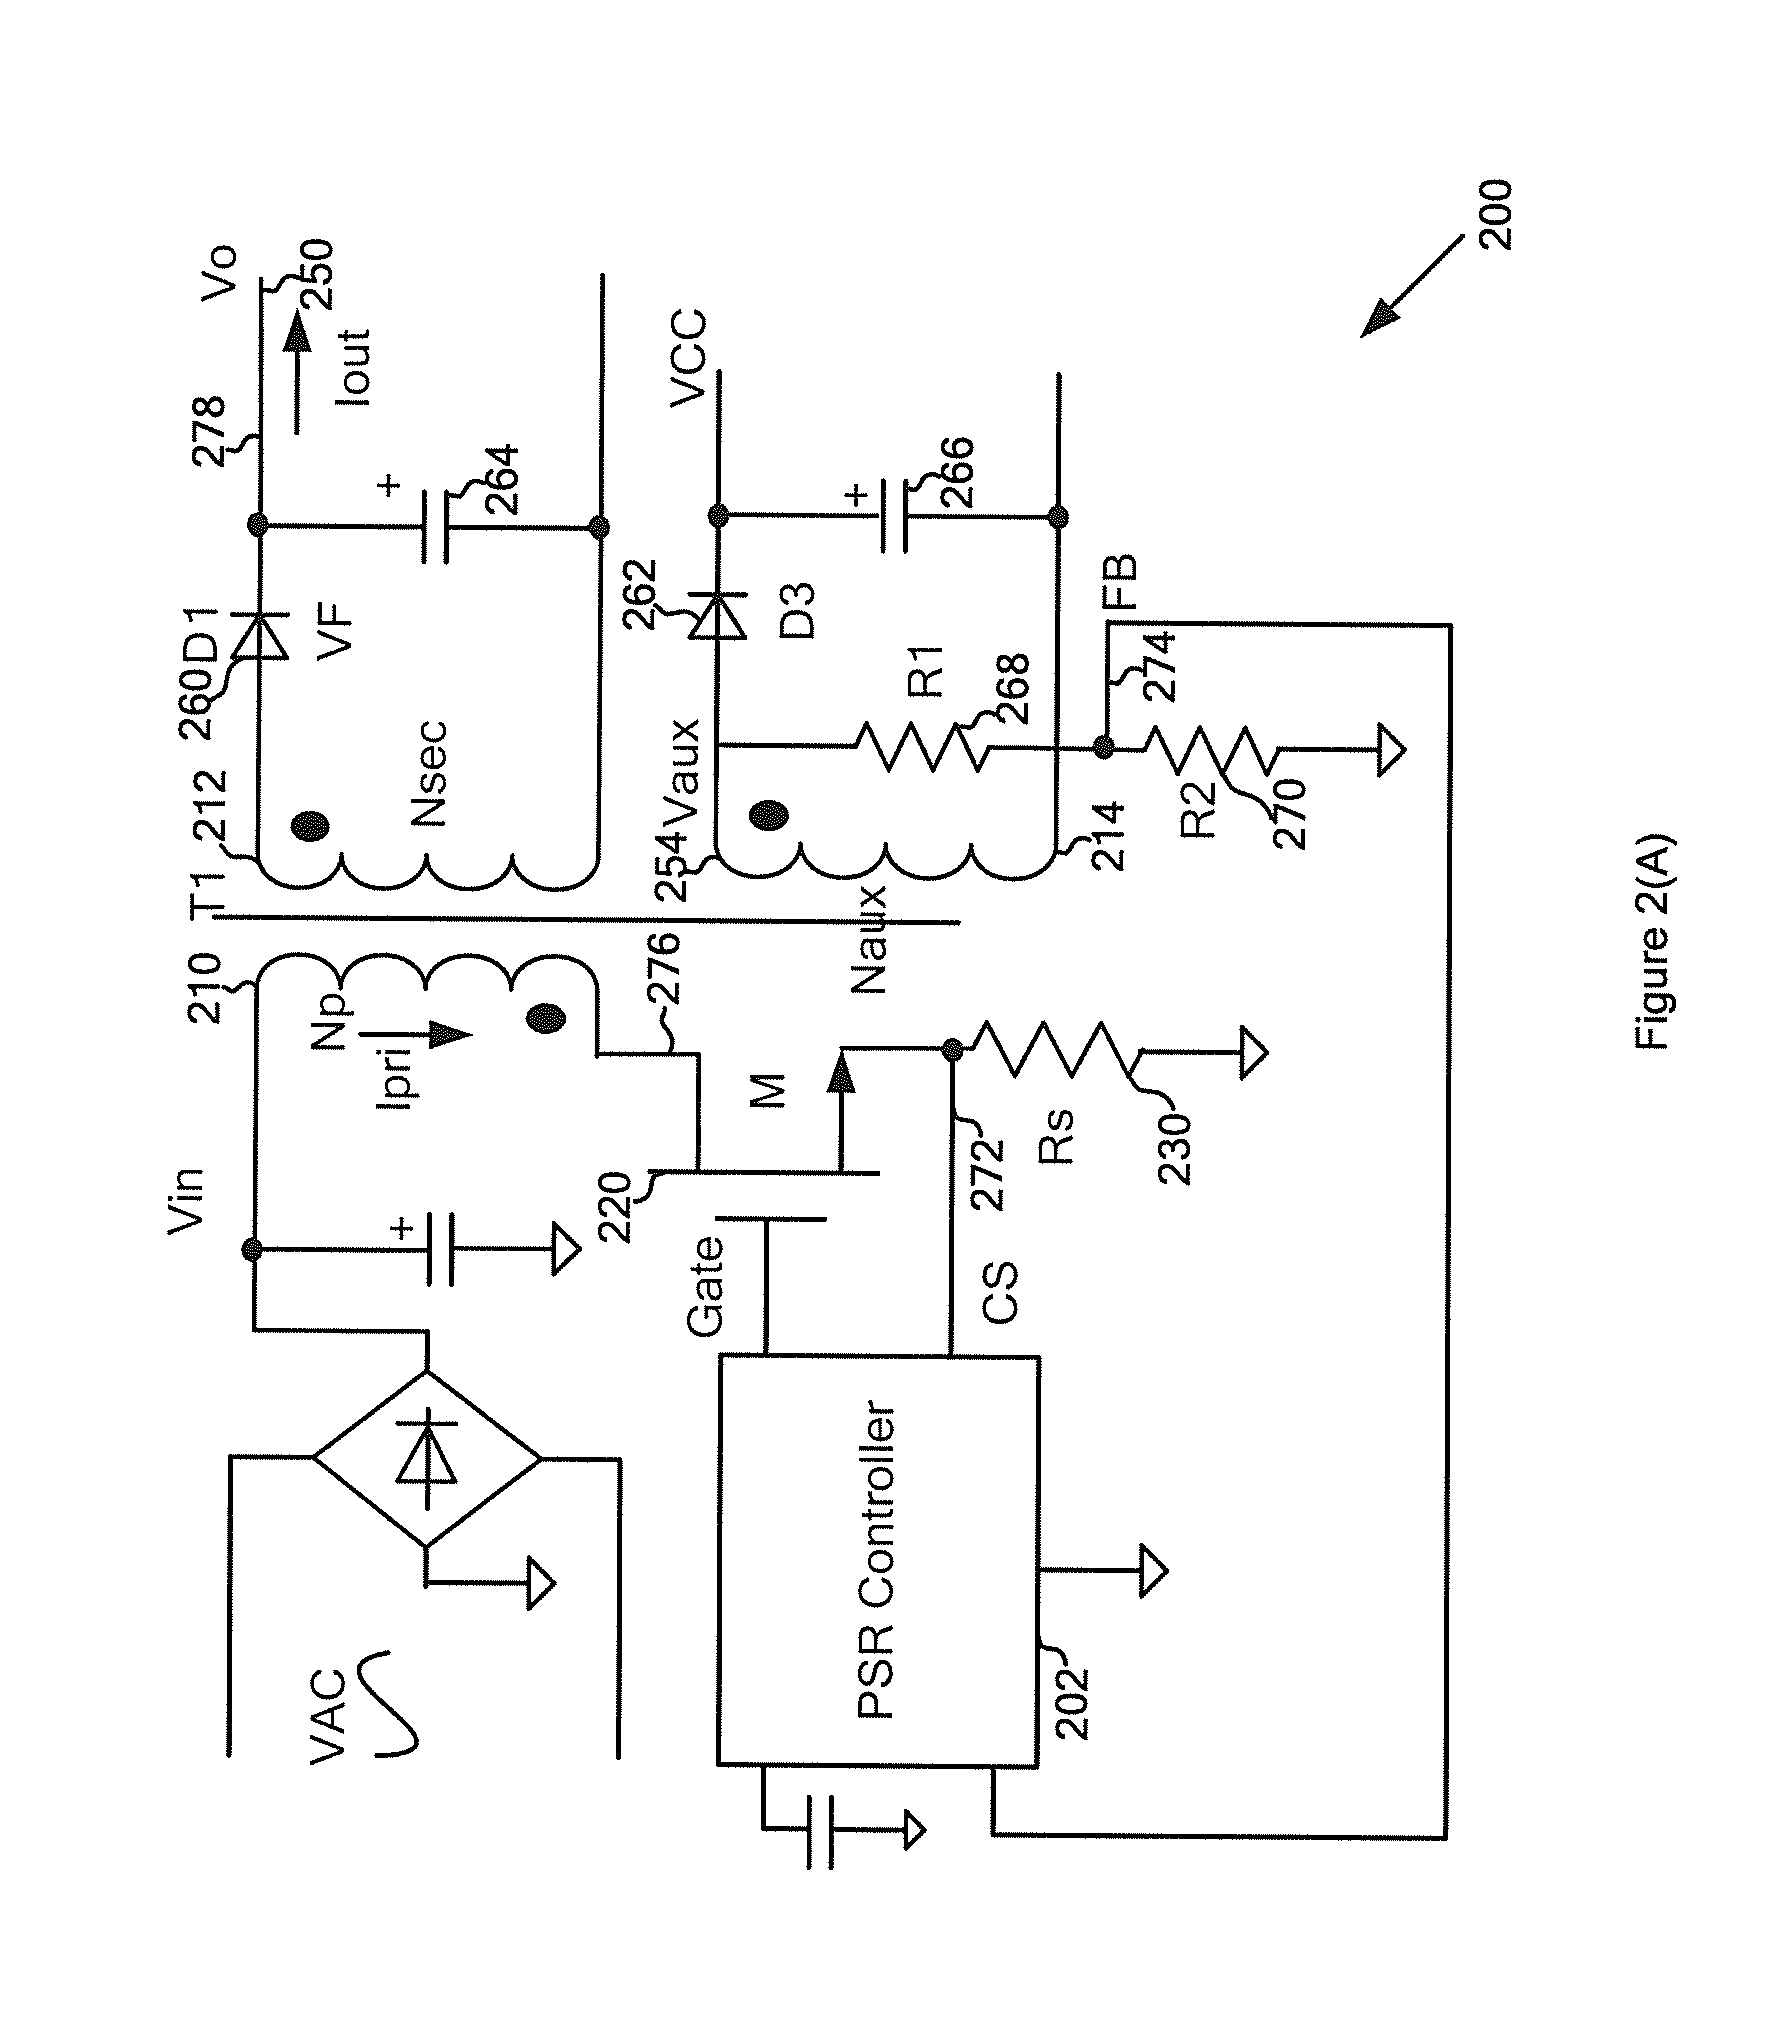 Systems and methods for regulating power conversion systems with output detection and synchronized rectifying mechanisms